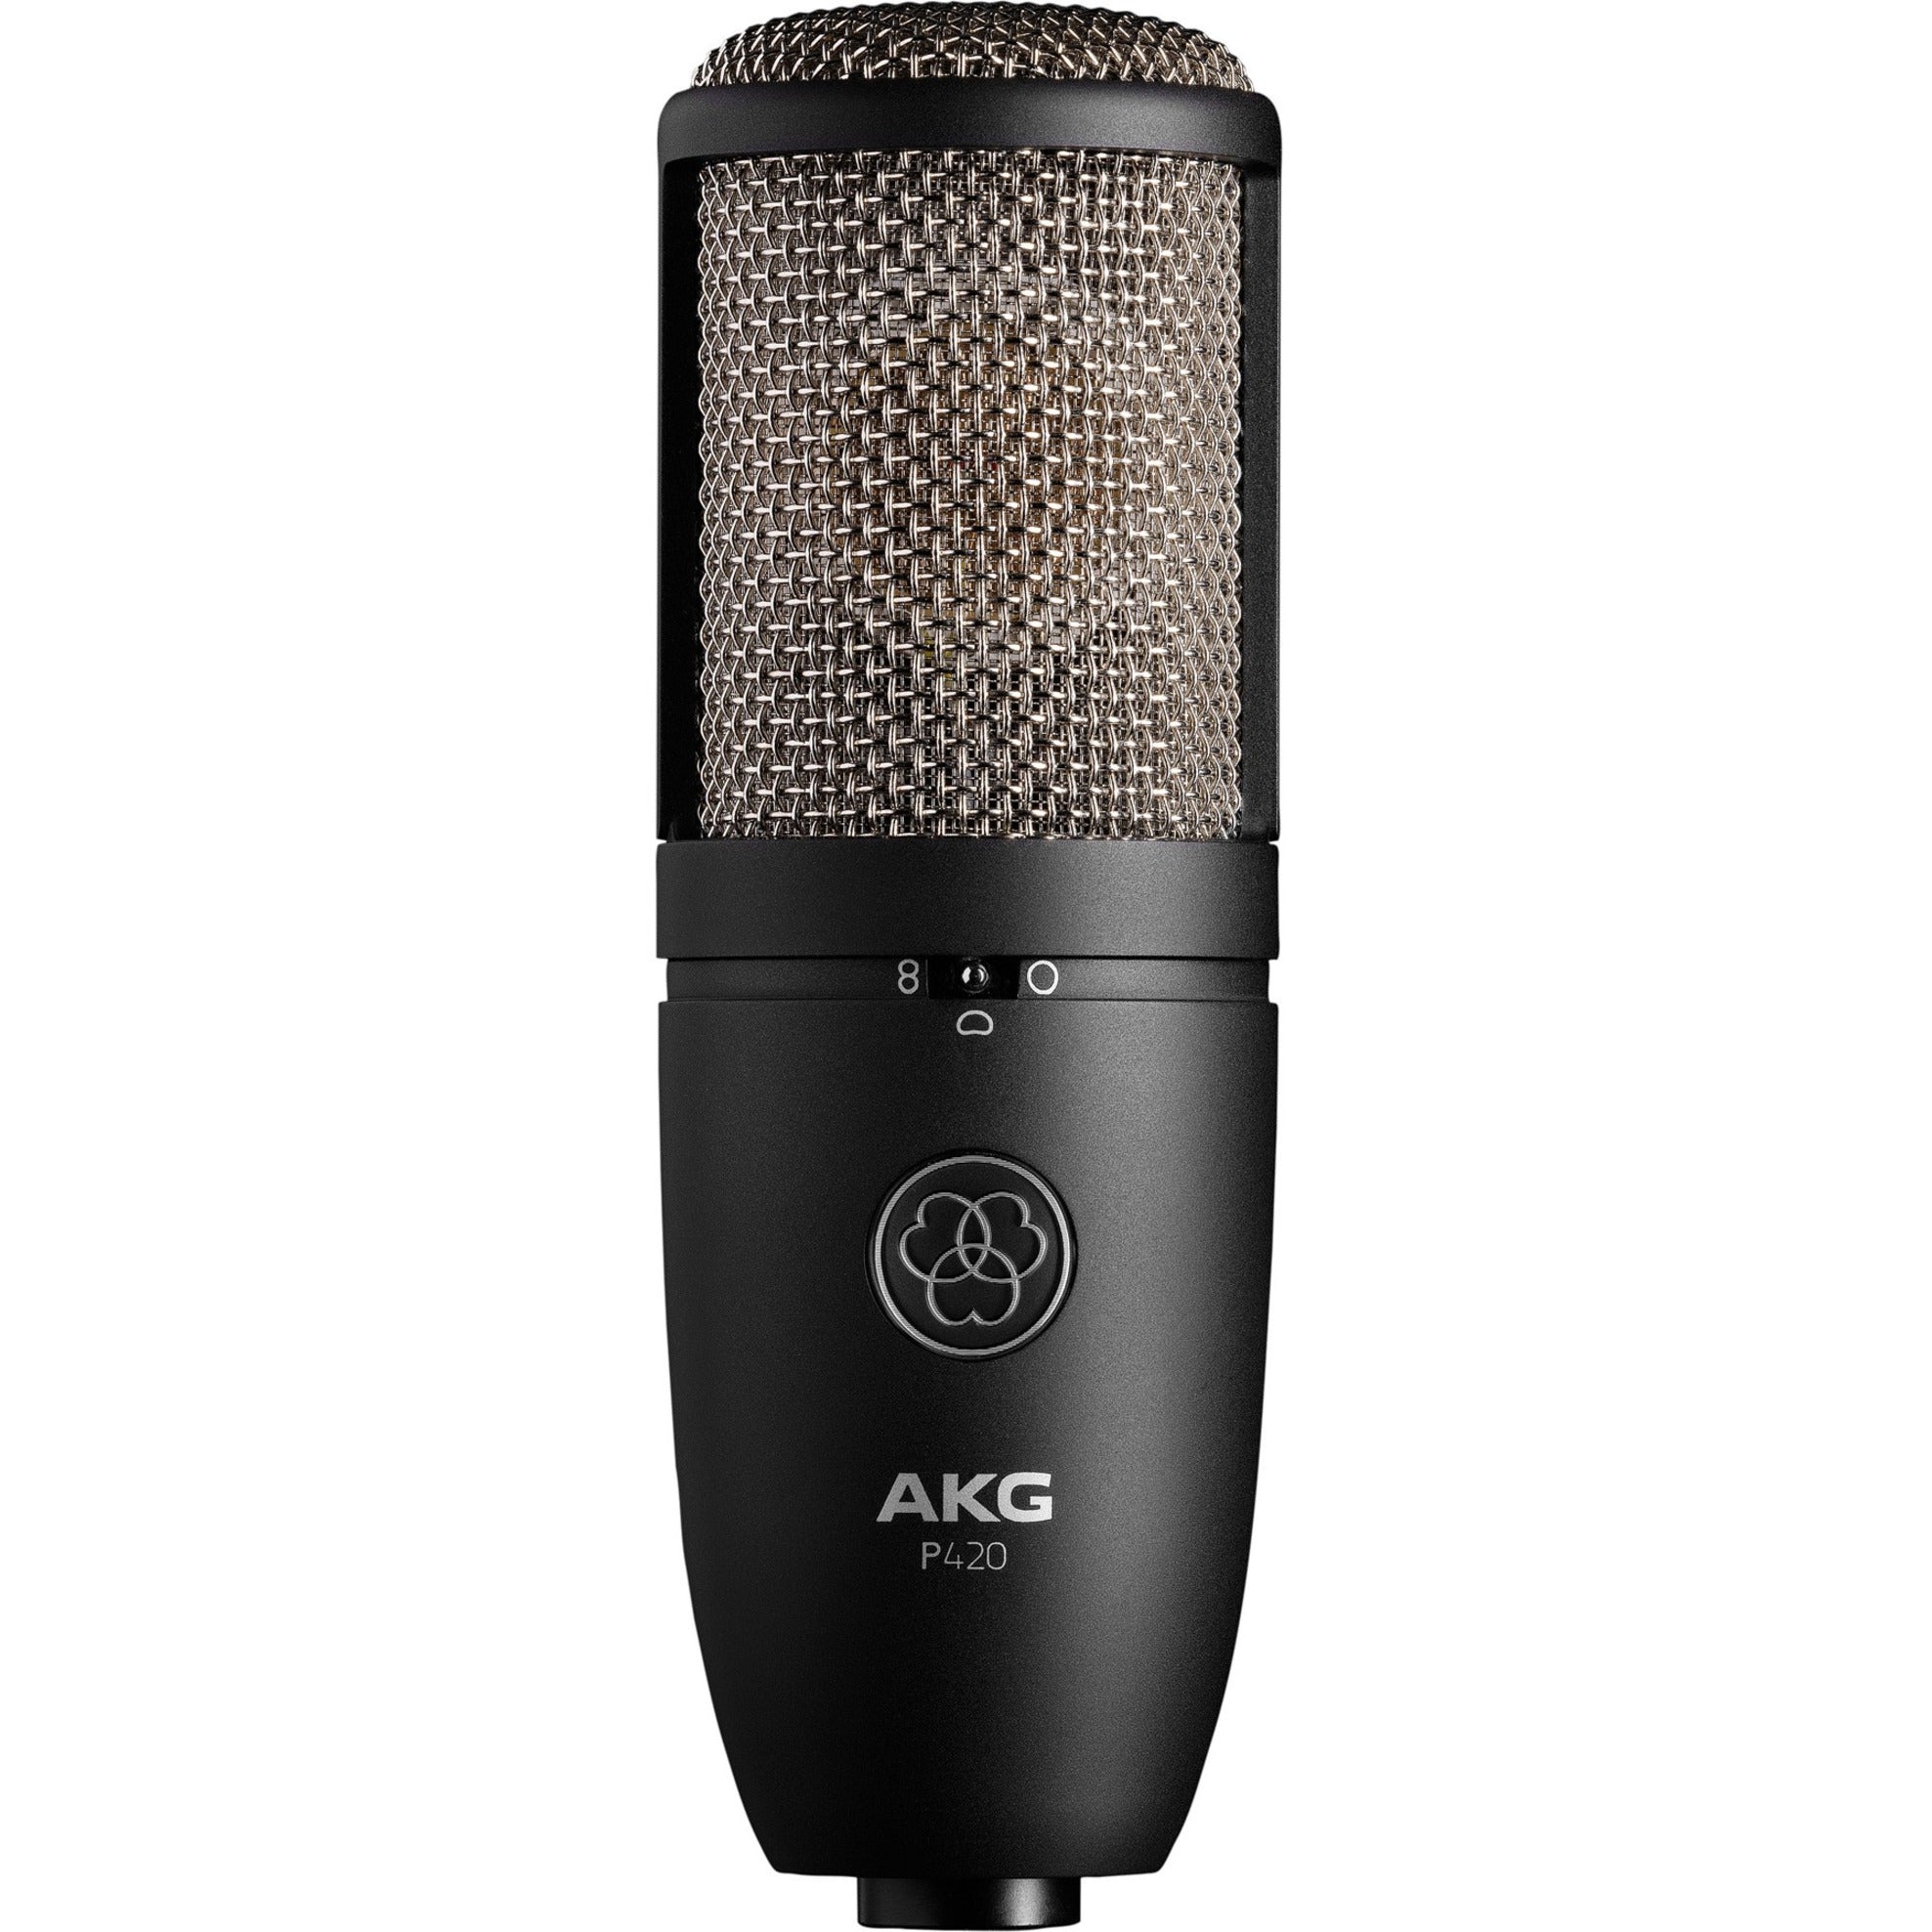 AKG 3101H00430 P420 High-Performance Dual-Capsule True Condenser Microphone, Handheld Wired Mic with Cardioid and Omni-directional Polar Patterns